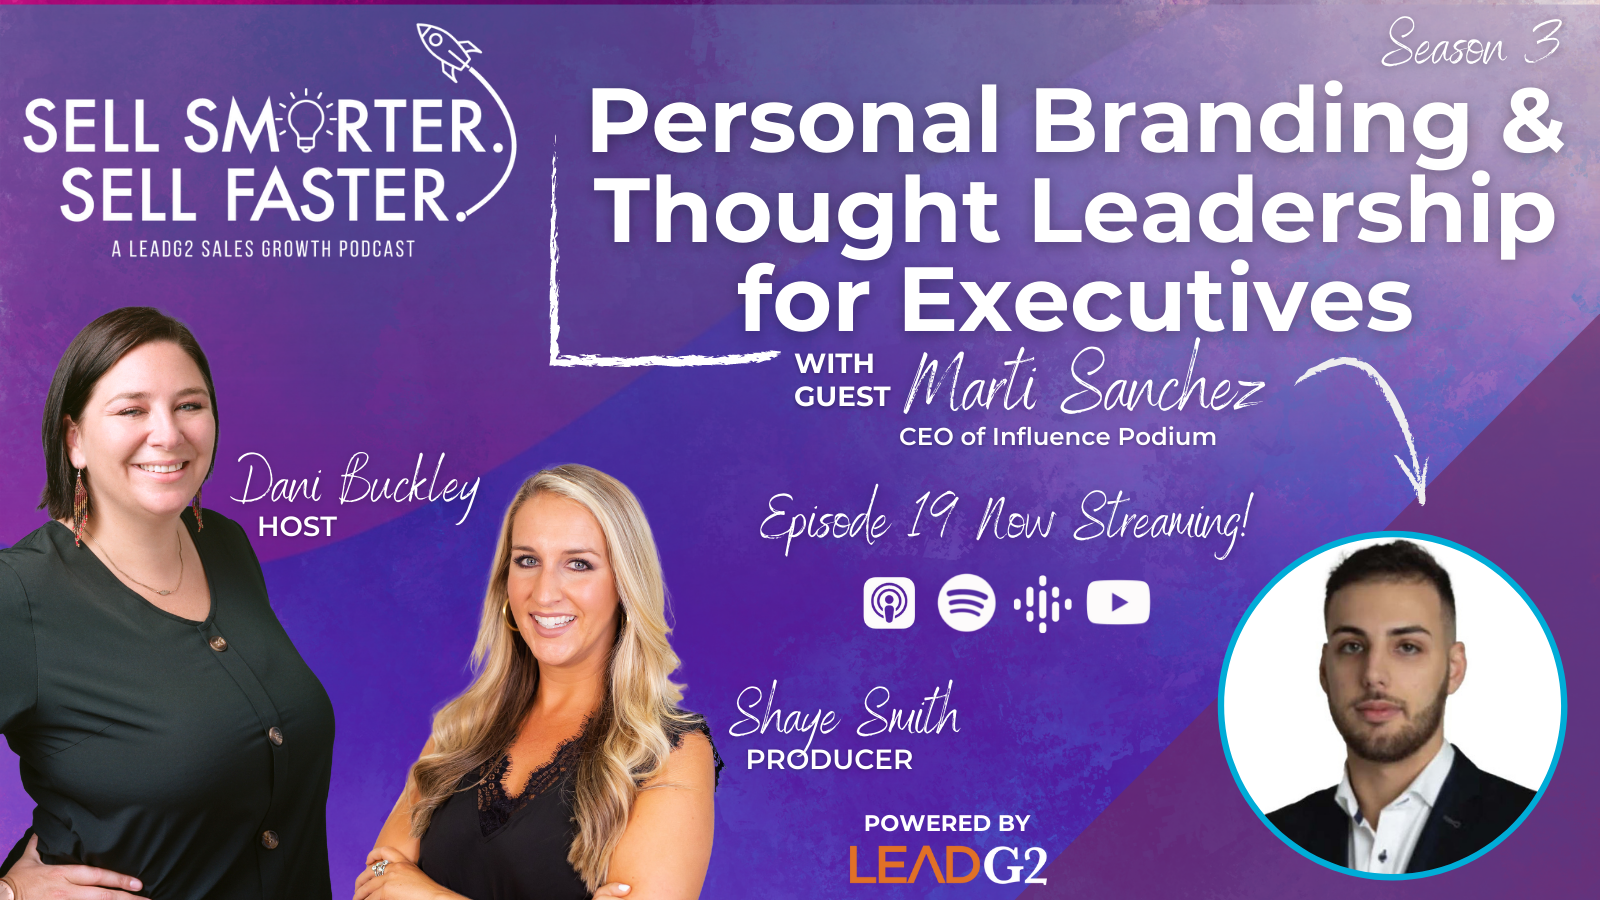 Personal Branding and Thought Leadership for Executives with Marti Sanchez